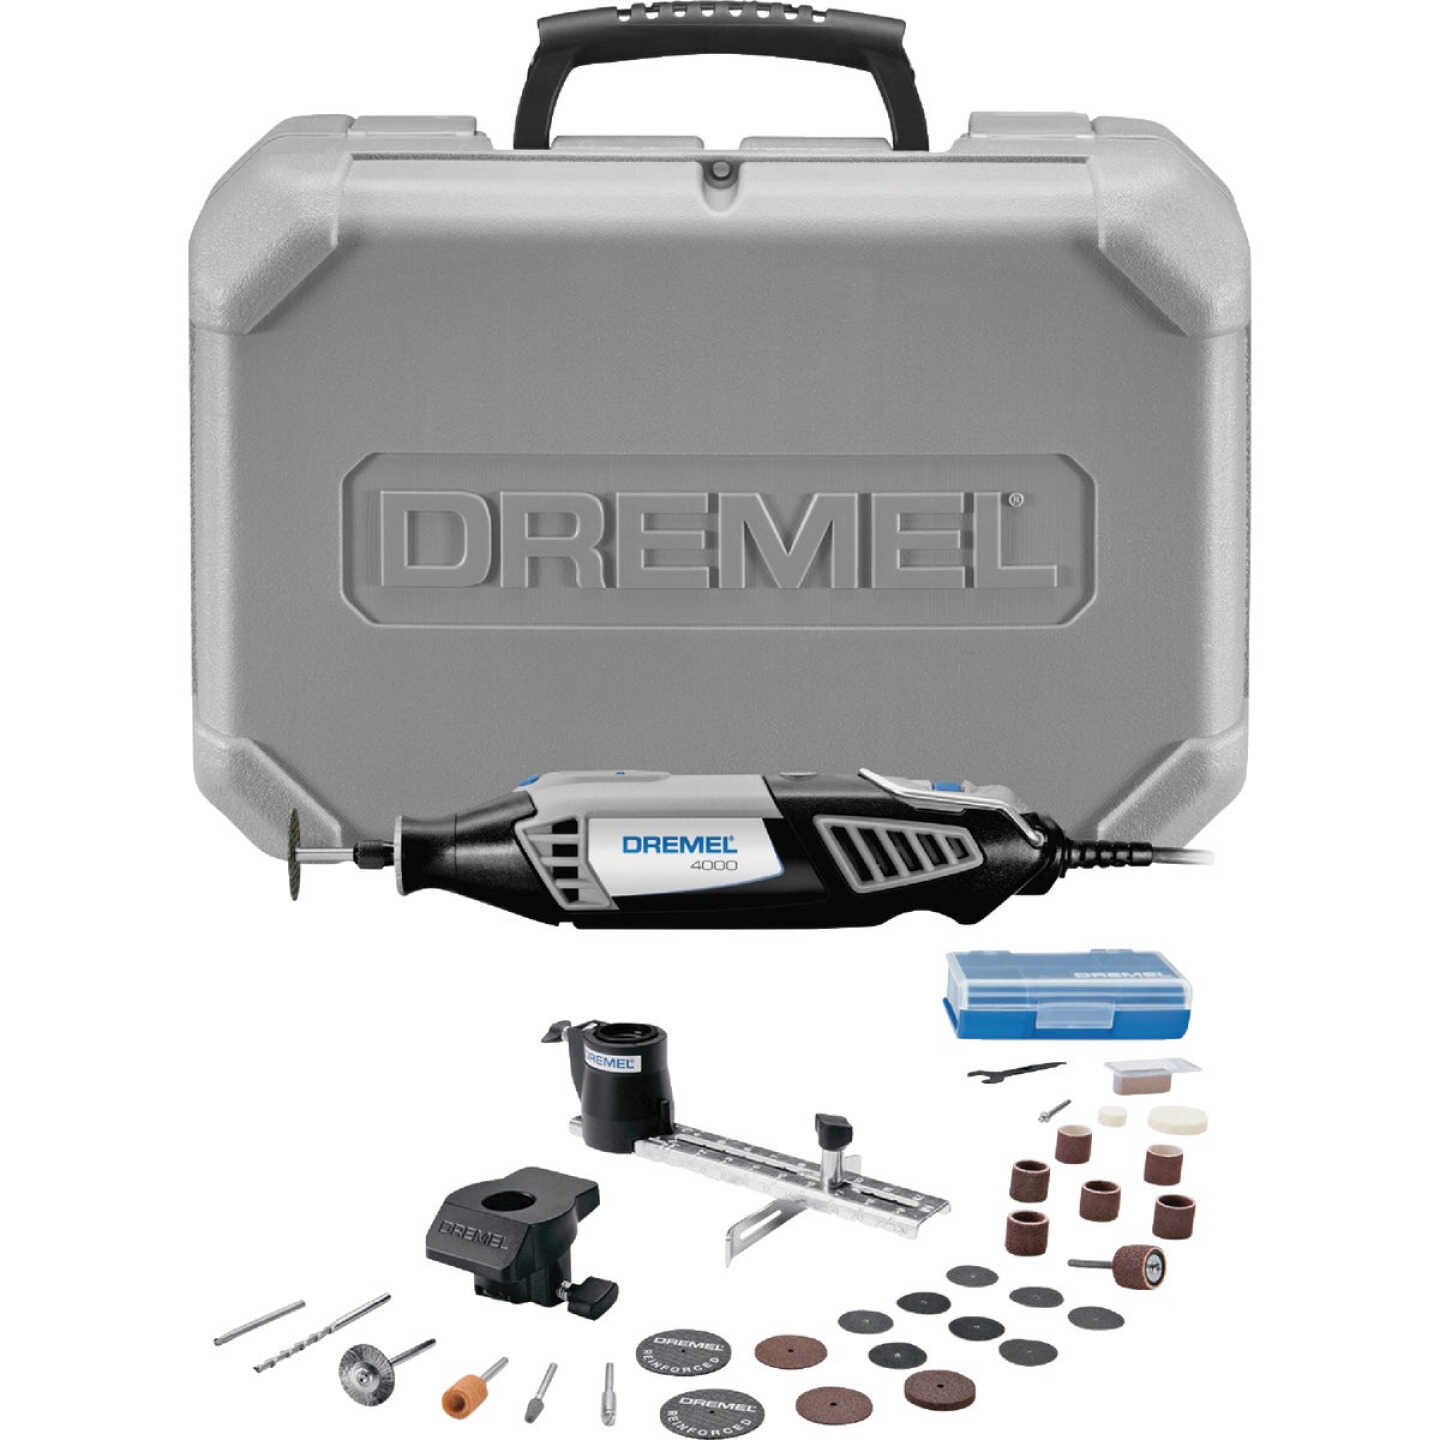 Dremel High Performance 120-Volt 1.6-Amp Variable Speed Electric Rotary Tool  Kit - Town Hardware & General Store